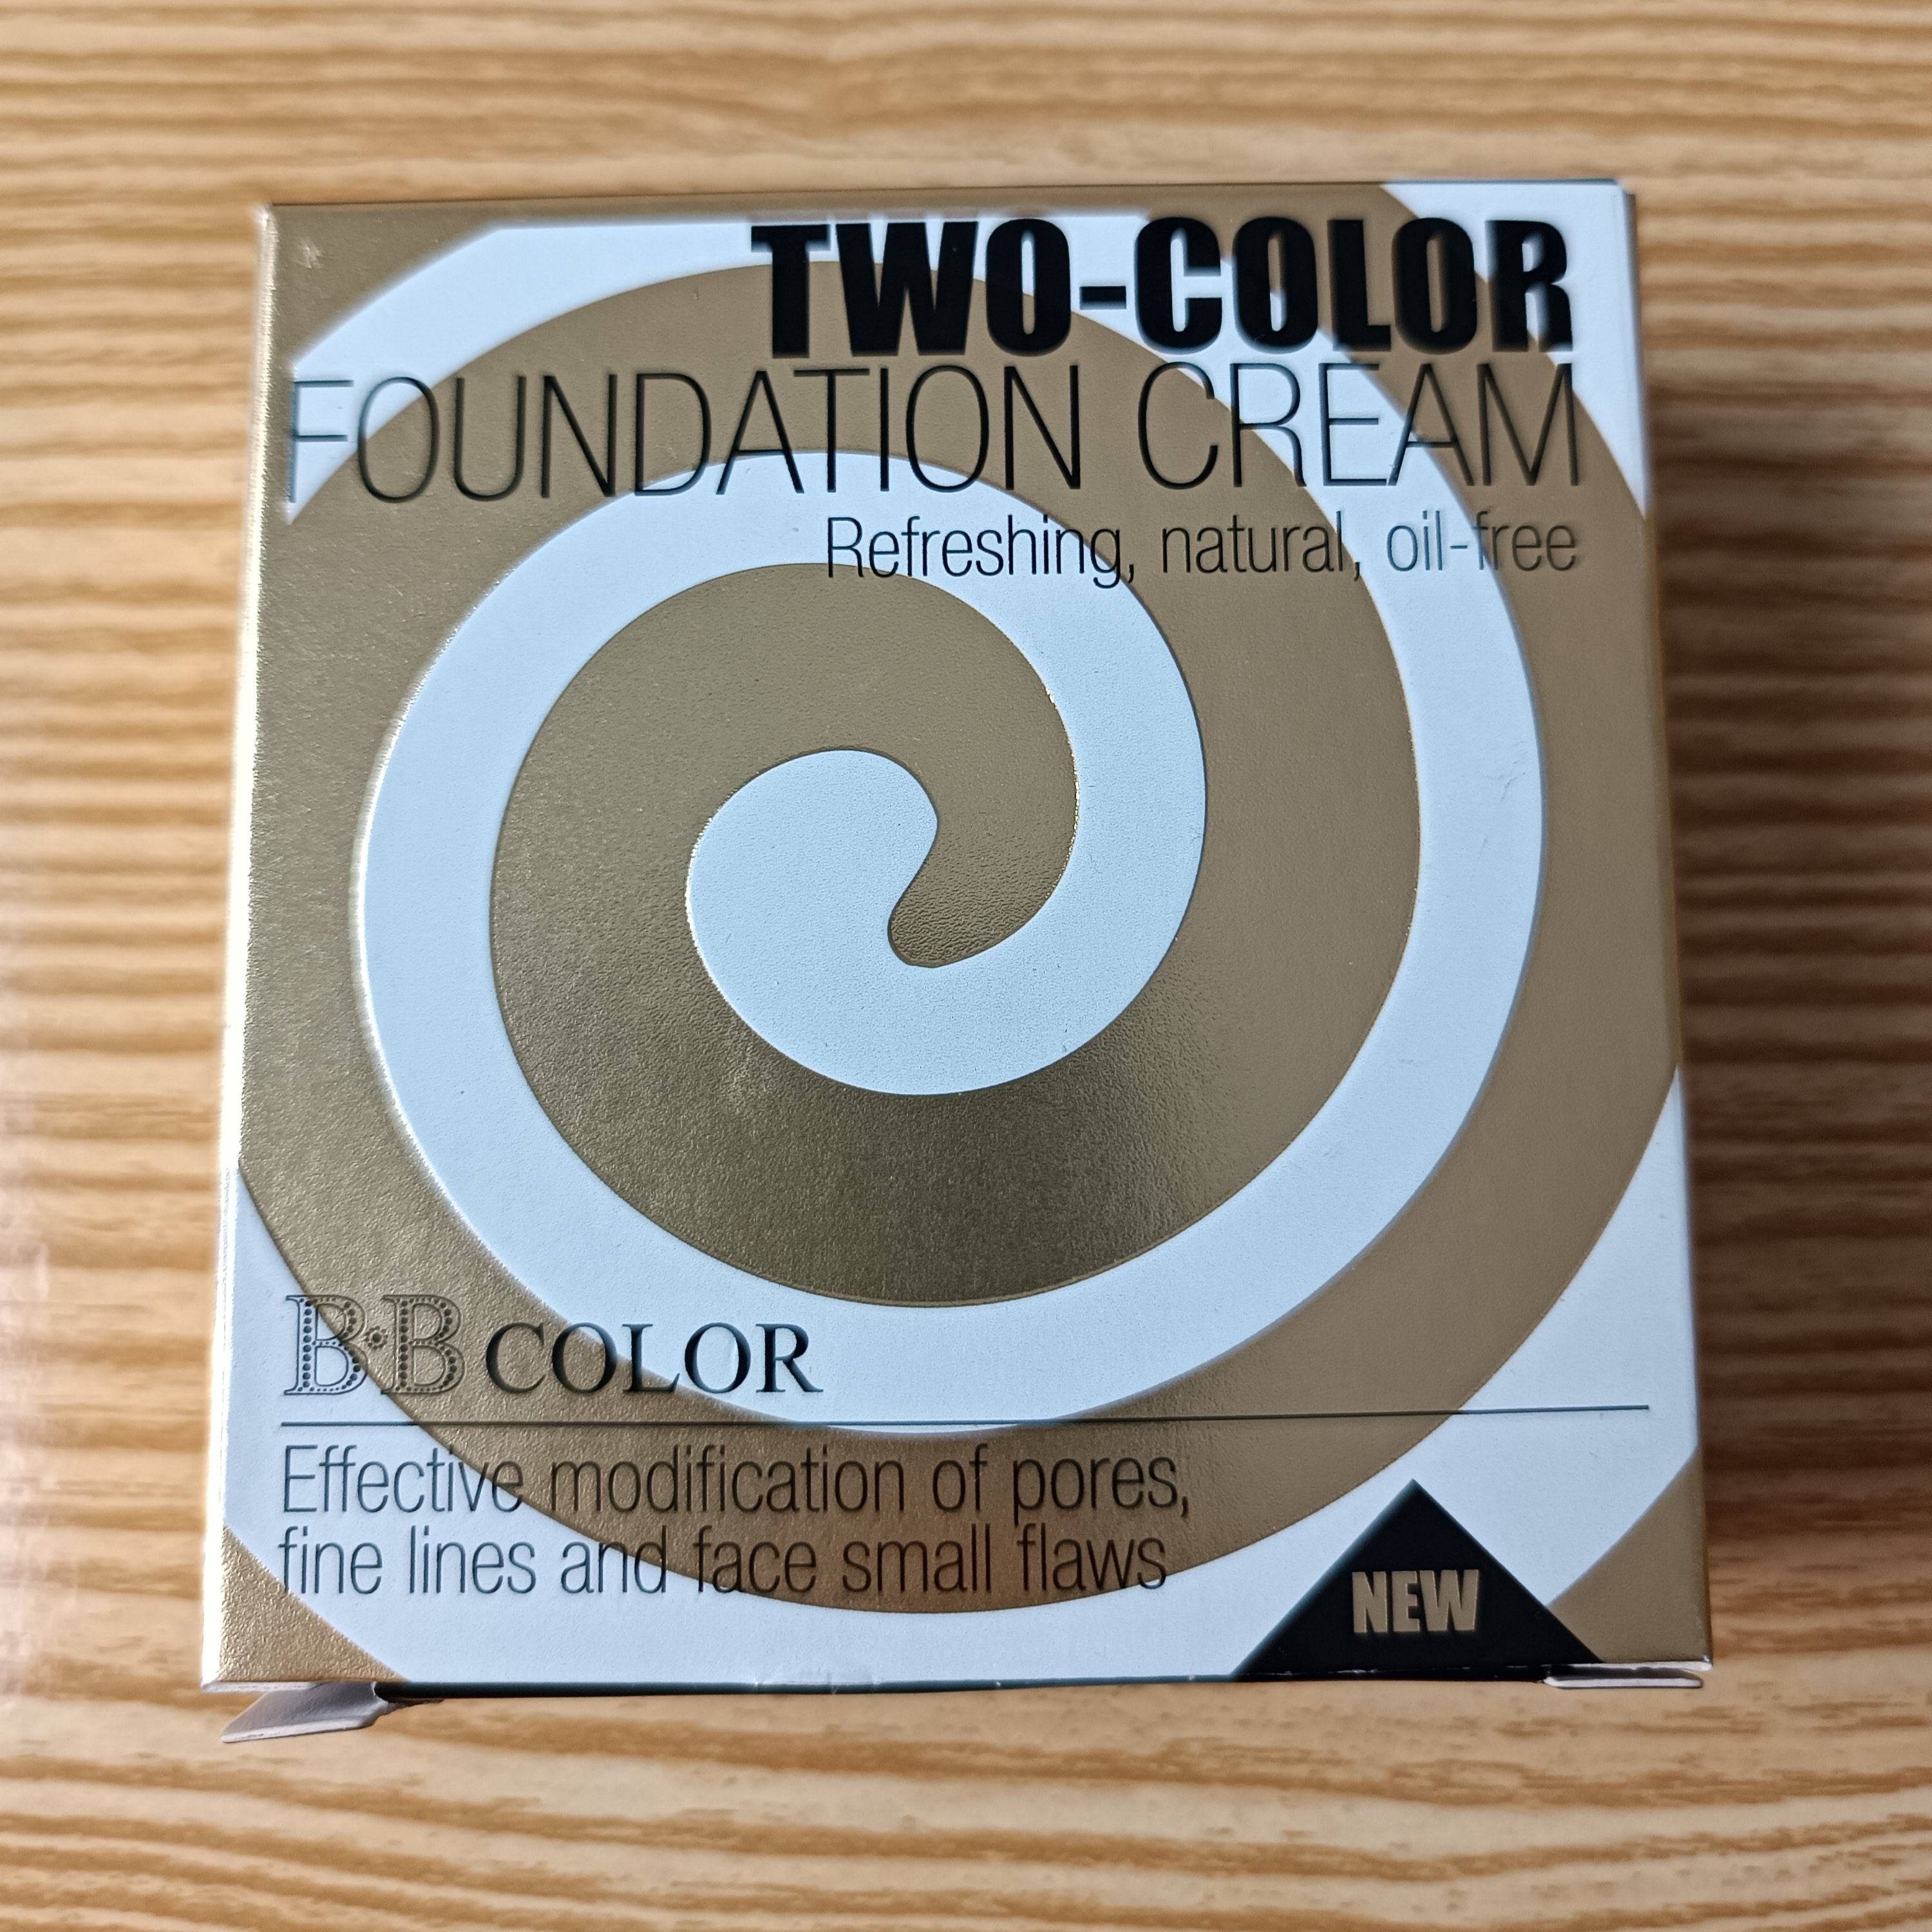 New Two color Foundation Cream 12g